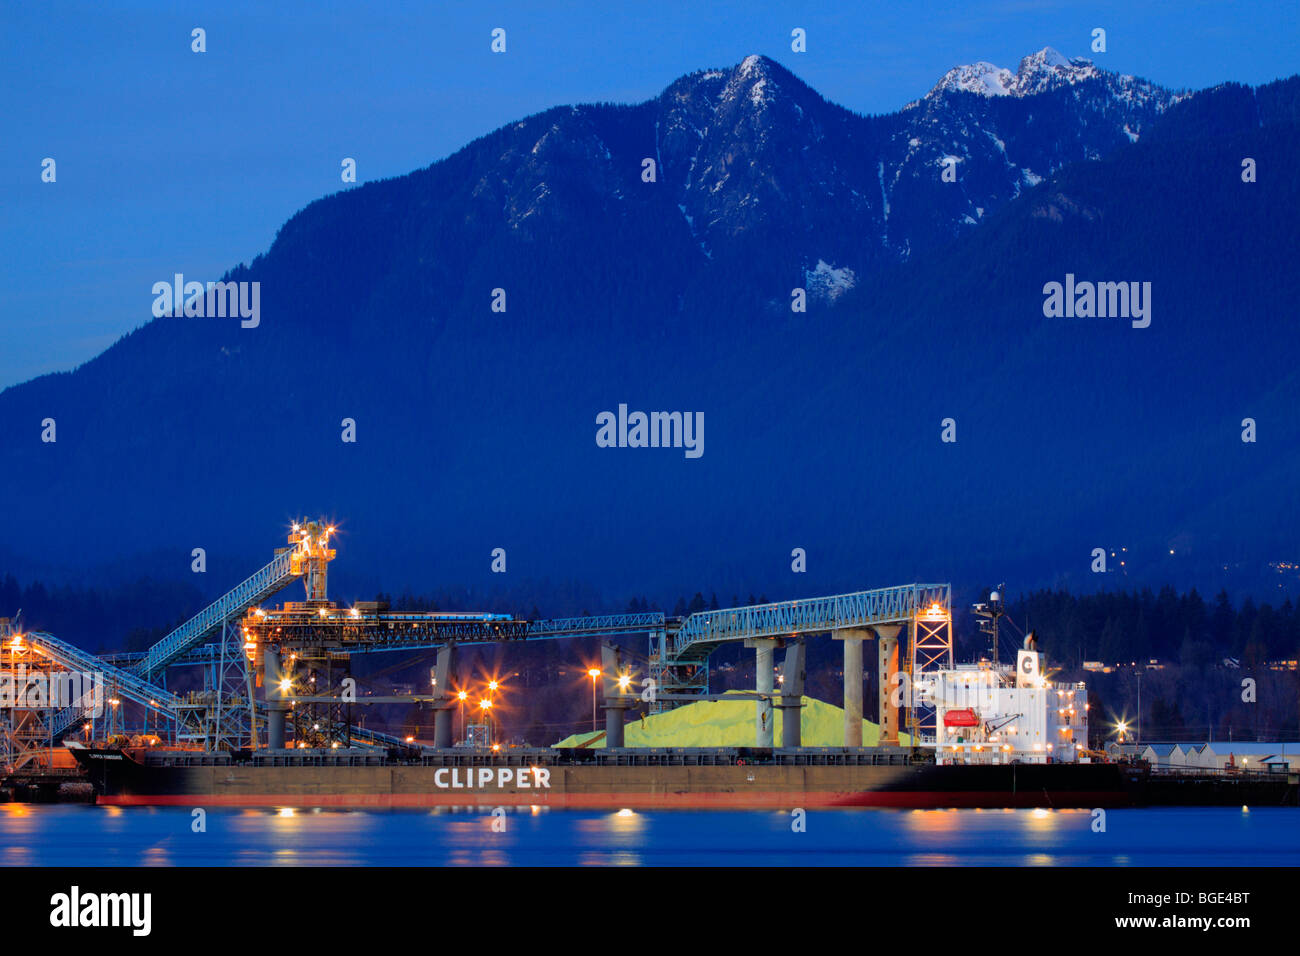 North Shore mountains and sulphur loading port at dusk-Vancouver, British Columbia, Canada. Stock Photo